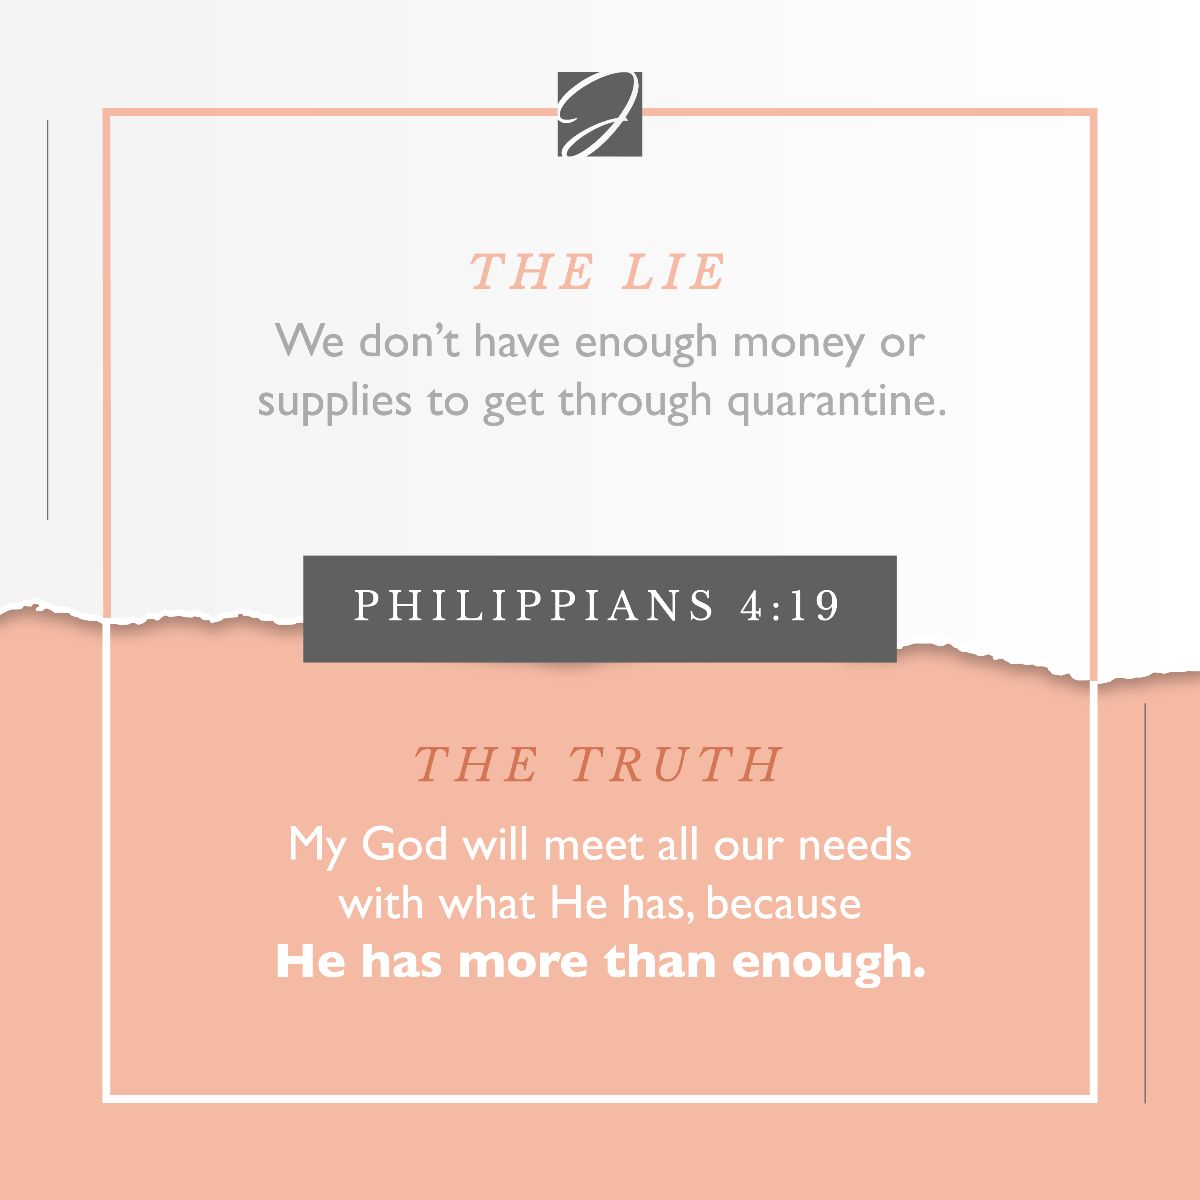 THE LIE We don't have enough money or supplies to through quarantine PHILIPPIANS 4.19 THE TRUTH My God will meet all our needs with what He has; because He has more than enougha get